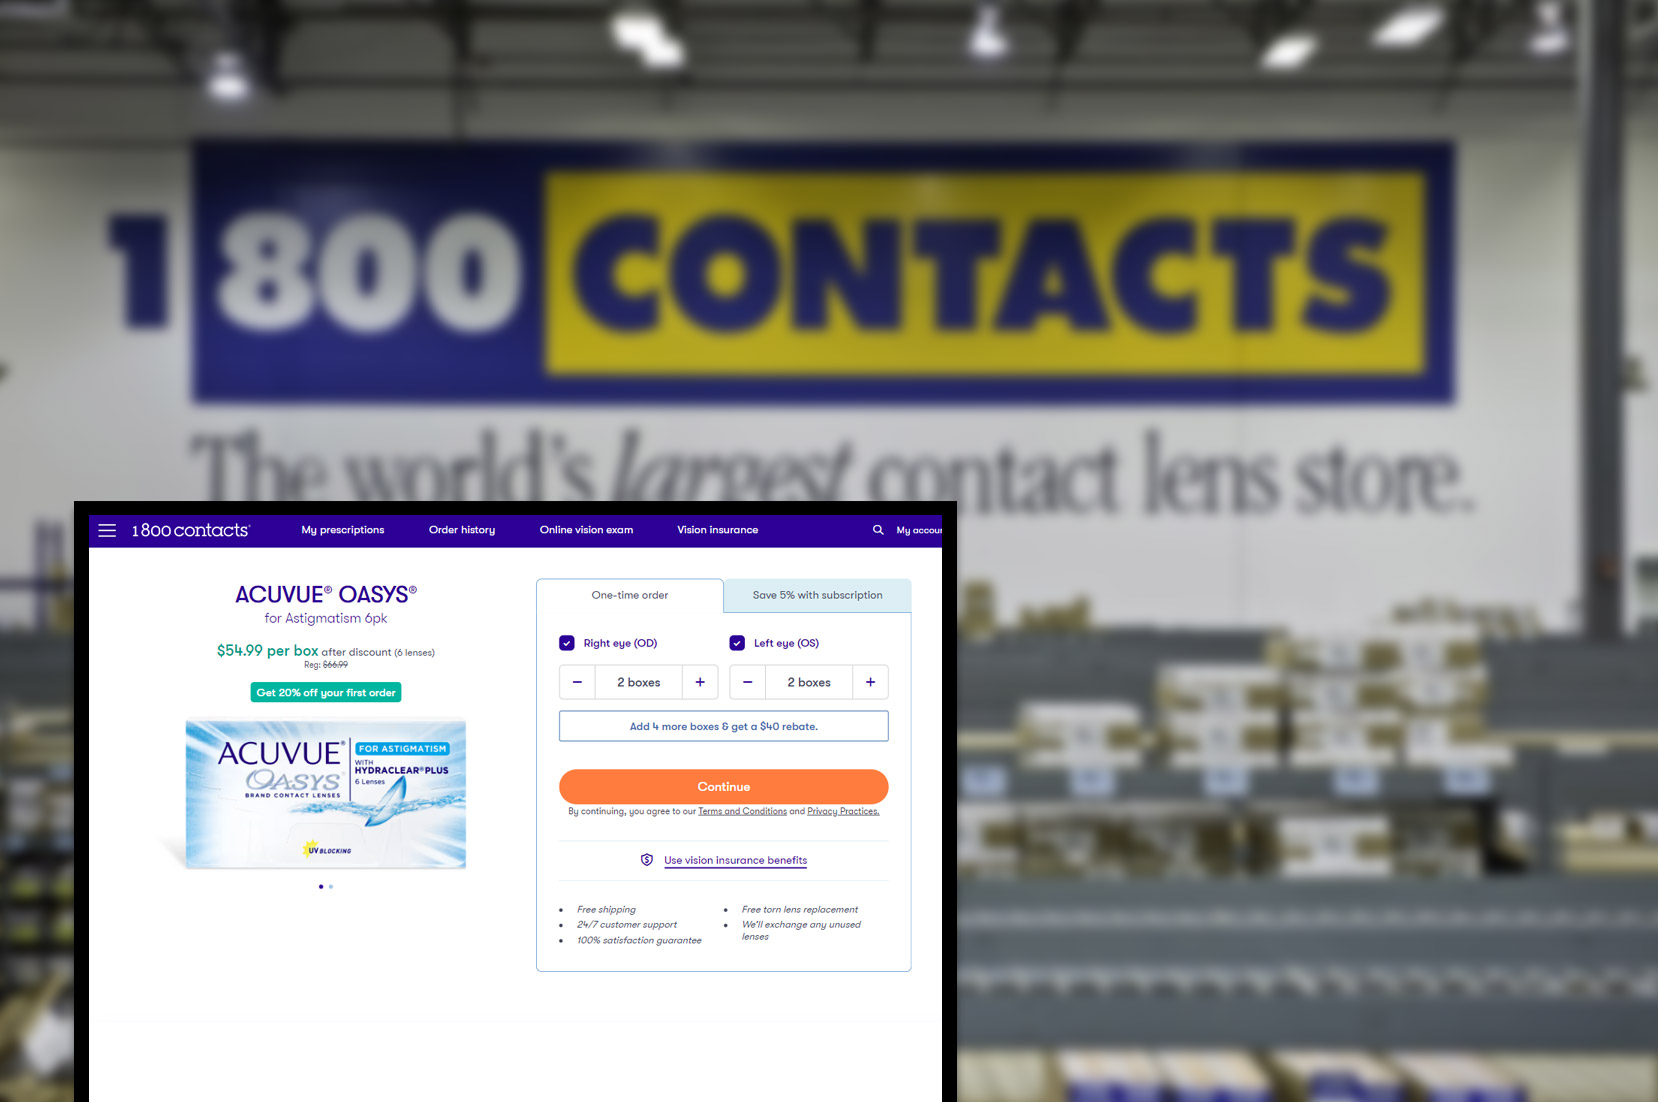 1800contacts-comproduct-pricing-information-and-image-scraping-services